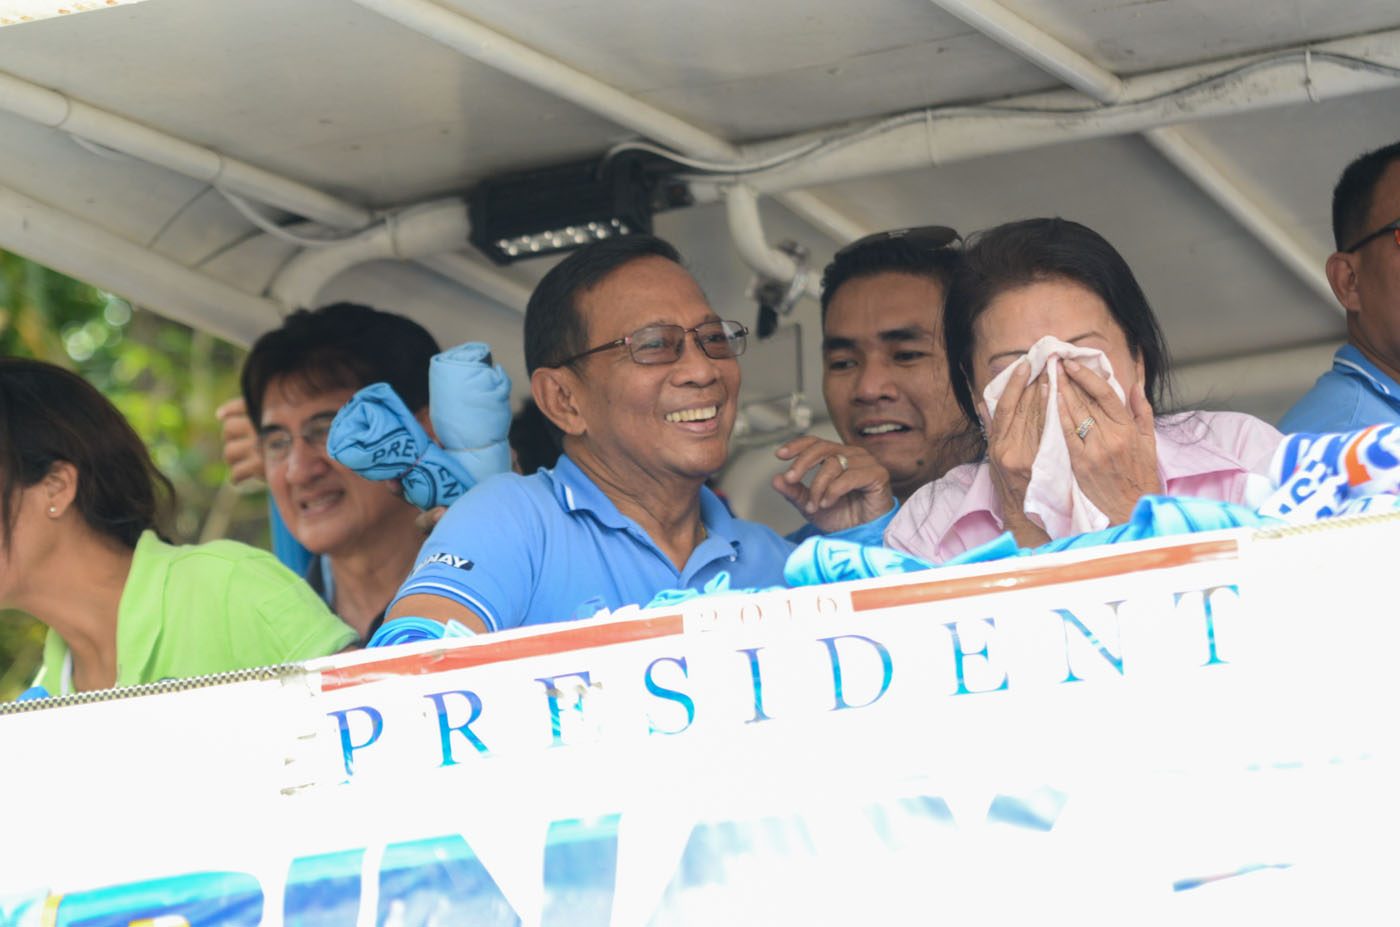 STILL SMILING. Binay flashes a smile even after spending hours on a motorcade around Nueva Ecija. Photo by Alecs Ongcal/Rappler 